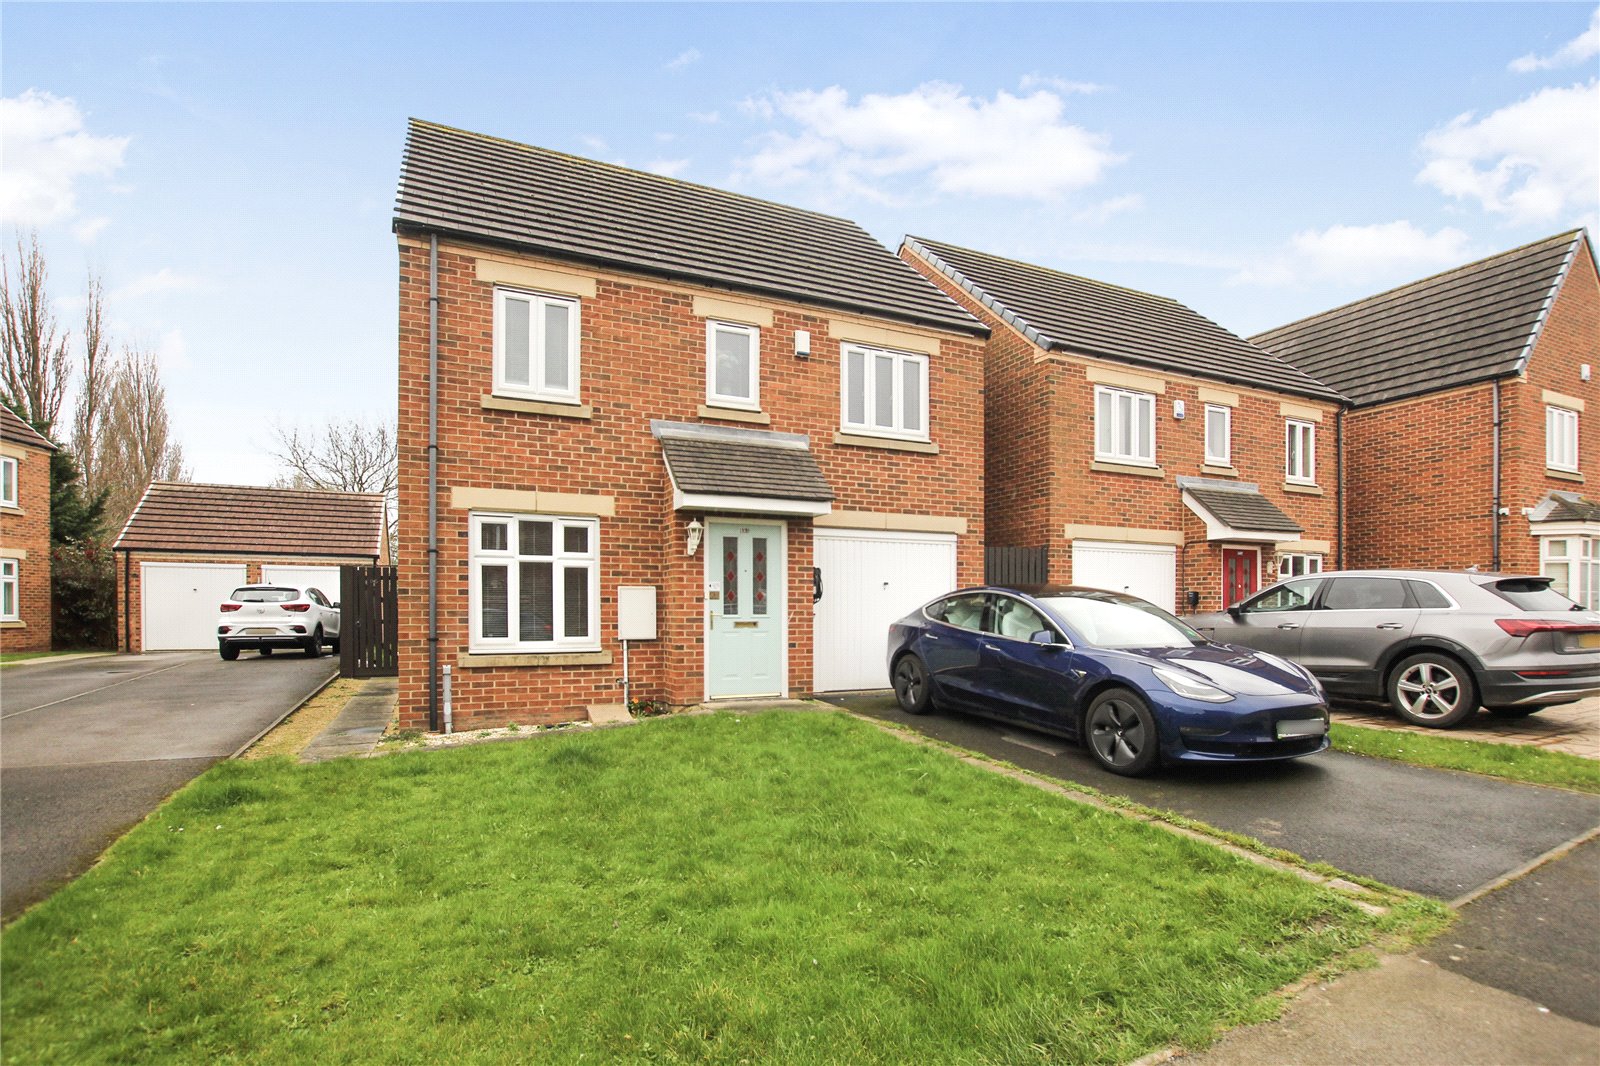 3 bed house for sale in Raines Court, Longlands  - Property Image 1